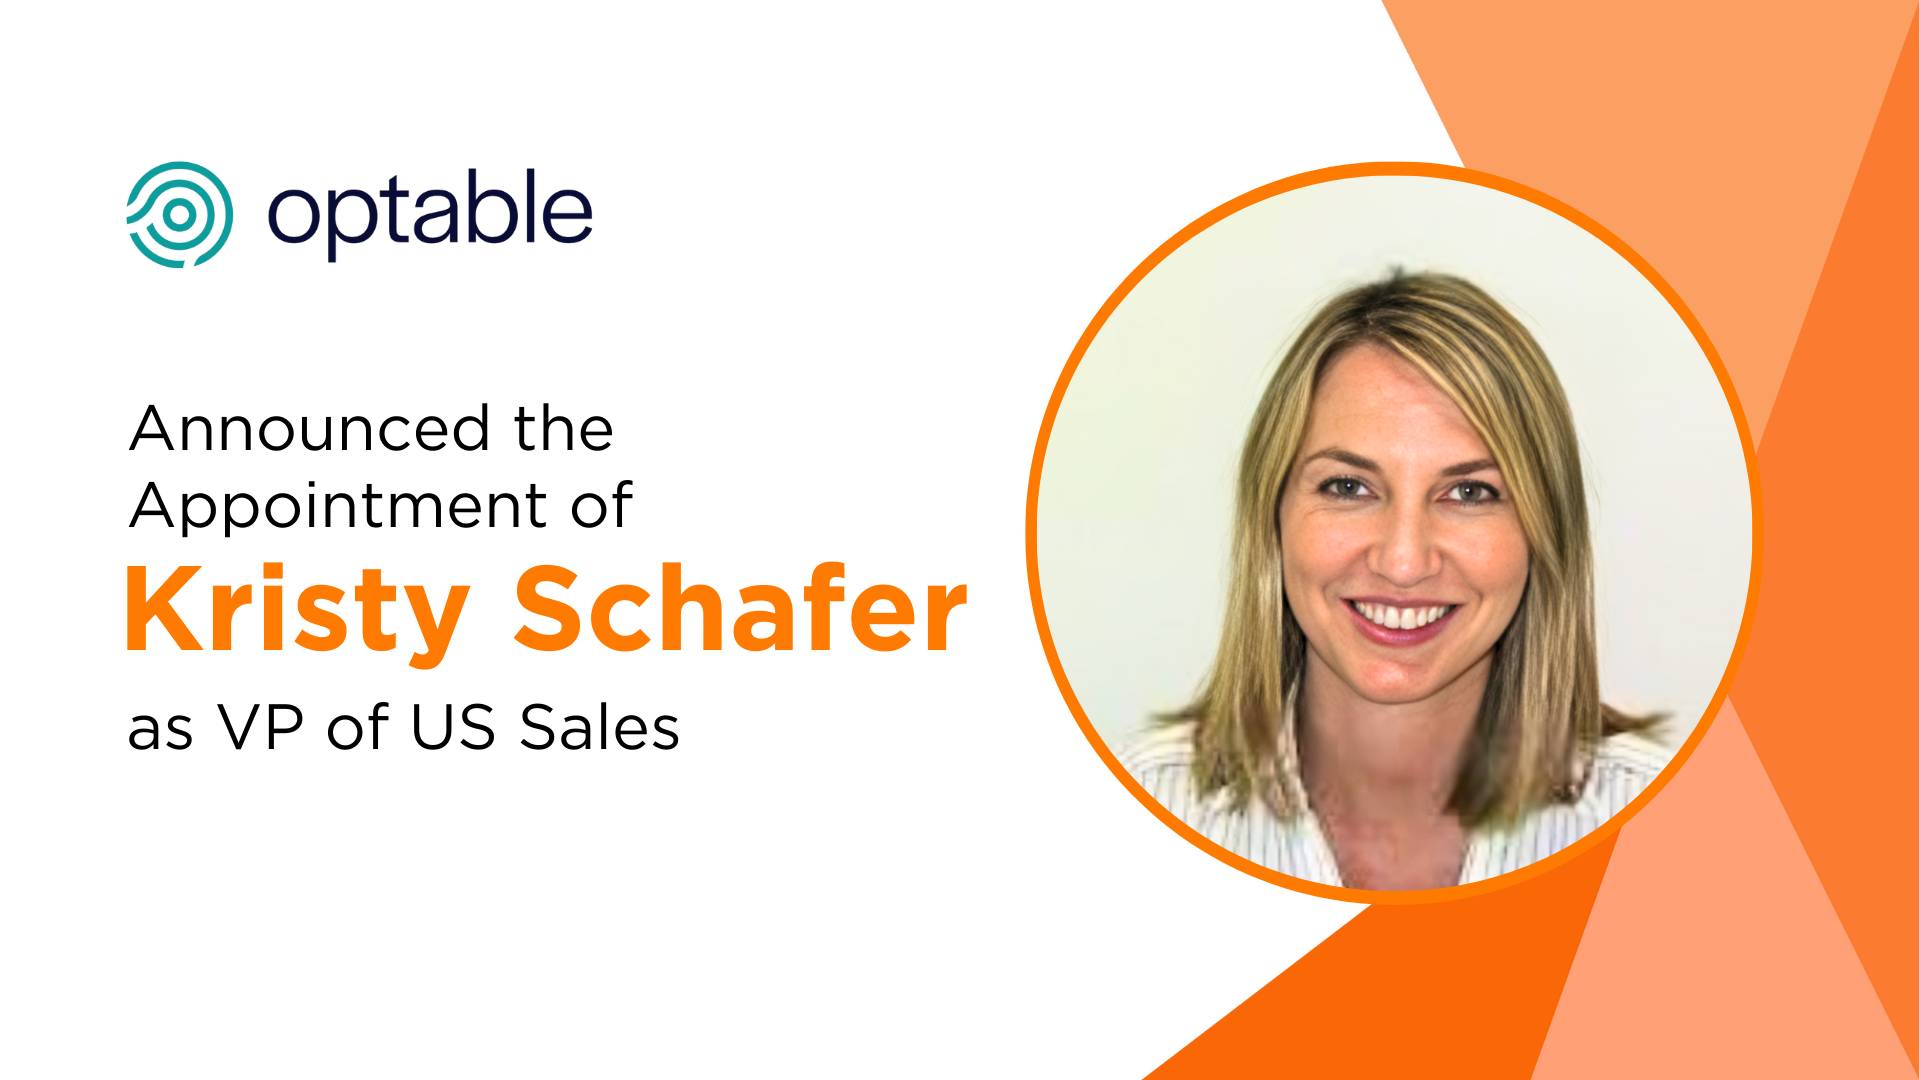 Optable Appoints Kristy Schafer as VP of US Sales, Expanding Growth & Innovation